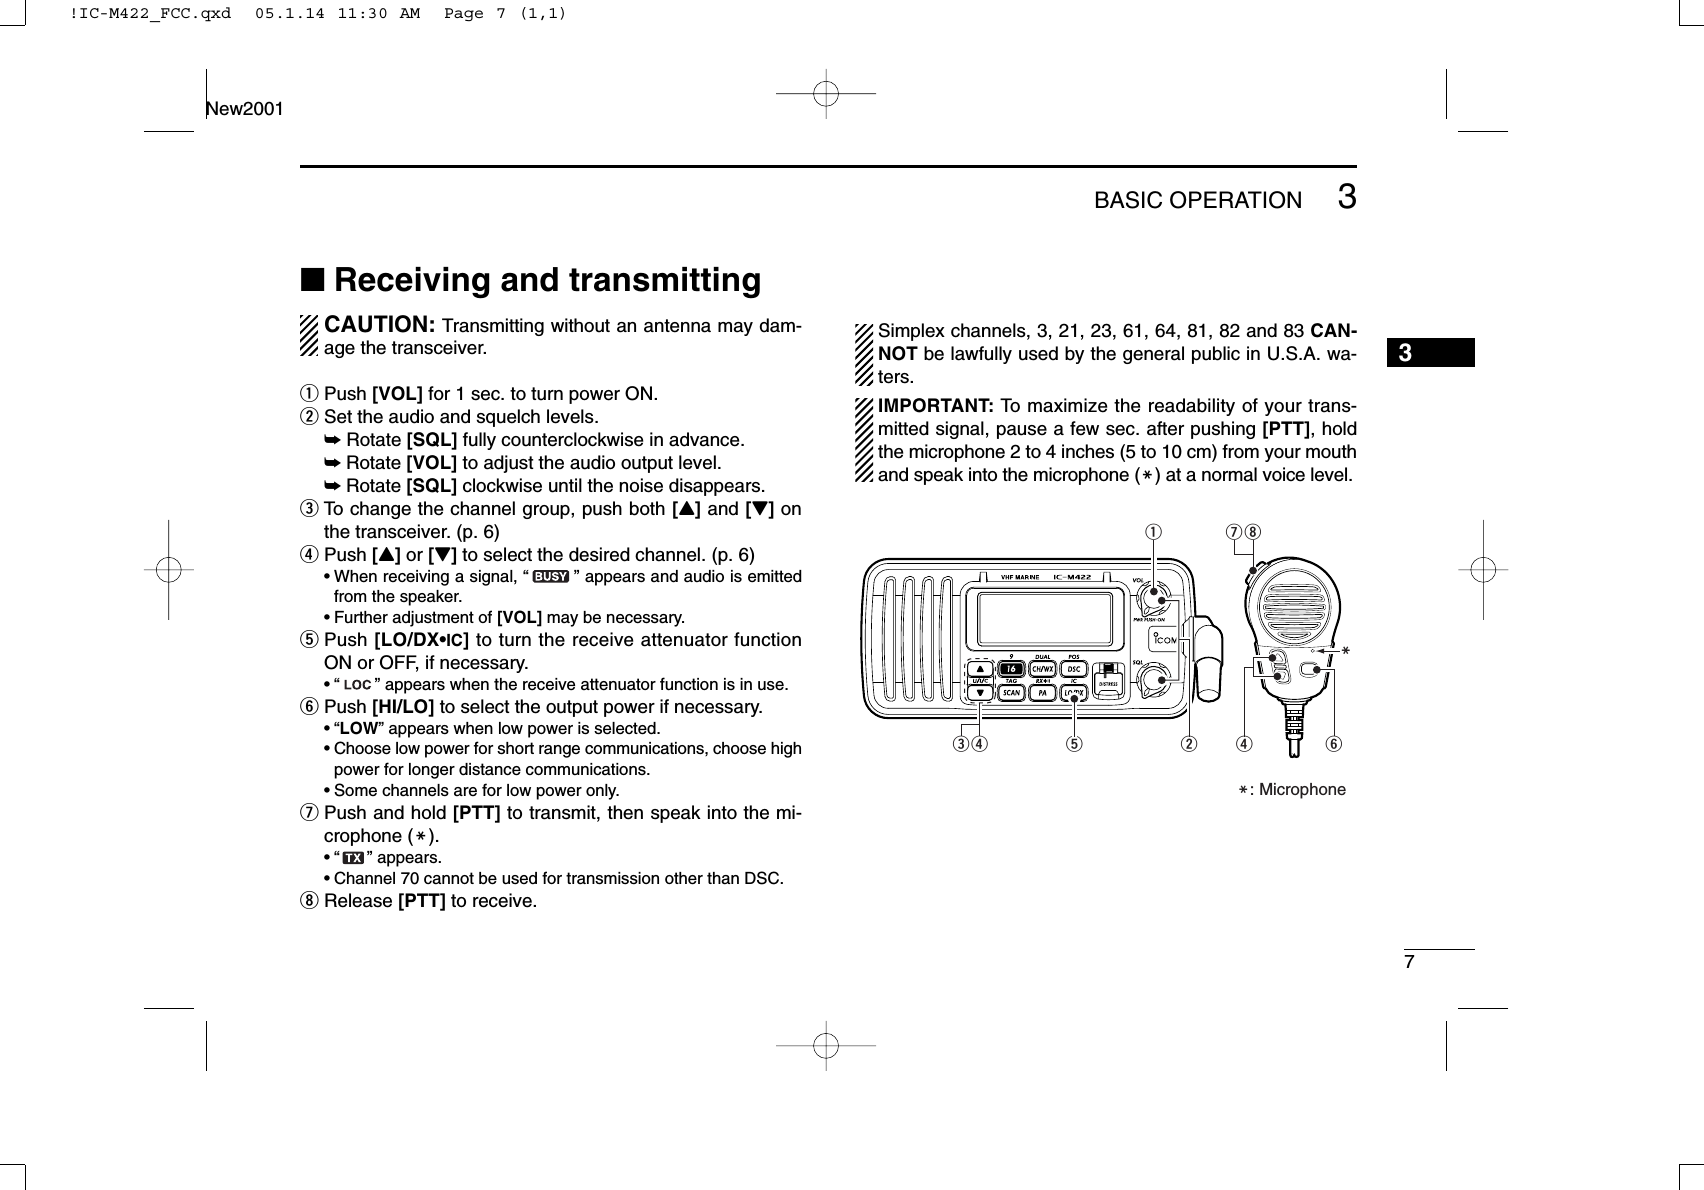 73BASIC OPERATIONNew20013■Receiving and transmittingCAUTION: Transmitting without an antenna may dam-age the transceiver.qPush [VOL] for 1 sec. to turn power ON.wSet the audio and squelch levels.➥Rotate [SQL] fully counterclockwise in advance.➥Rotate [VOL] to adjust the audio output level.➥Rotate [SQL] clockwise until the noise disappears.eTo change the channel group, push both [Y]and [Z]onthe transceiver. (p. 6)rPush [Y]or [Z]to select the desired channel. (p. 6)•When receiving a signal, “” appears and audio is emittedfrom the speaker.•Further adjustment of [VOL] may be necessary.tPush [LO/DX•IC]to turn the receive attenuator functionON or OFF, if necessary.•“ ” appears when the receive attenuator function is in use.yPush [HI/LO] to select the output power if necessary.•“LOW” appears when low power is selected.•Choose low power for short range communications, choose highpower for longer distance communications.•Some channels are for low power only.uPush and hold [PTT] to transmit, then speak into the mi-crophone (M).•“ ” appears.•Channel 70 cannot be used for transmission other than DSC.iRelease [PTT] to receive.Simplex channels, 3, 21, 23, 61, 64, 81, 82 and 83 CAN-NOT be lawfully used by the general public in U.S.A. wa-ters.IMPORTANT: To maximize the readability of your trans-mitted signal, pause a few sec. after pushing [PTT], holdthe microphone 2 to 4 inches (5 to 10 cm) from your mouthand speak into the microphone (M) at a normal voice level.iryMuqM: Microphonewrte!IC-M422_FCC.qxd  05.1.14 11:30 AM  Page 7 (1,1)